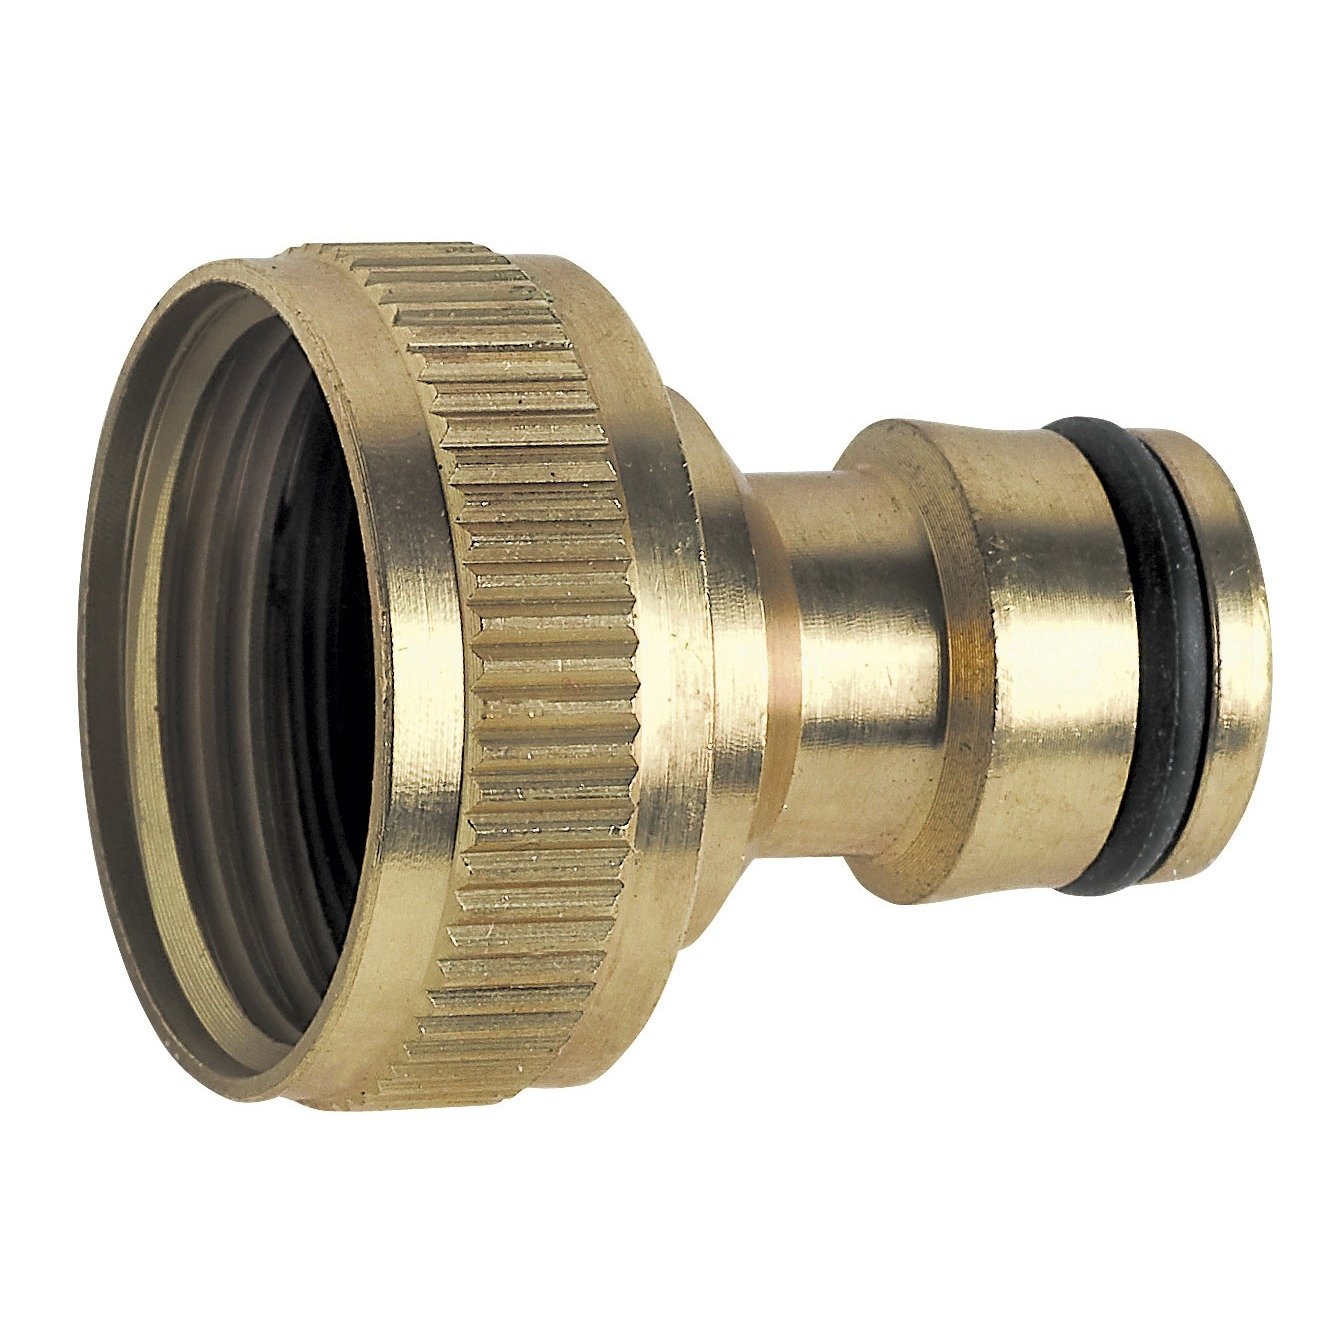 Made of Brass Hozelock Compatible Threaded Female Tap Connector 3/4" and 1"